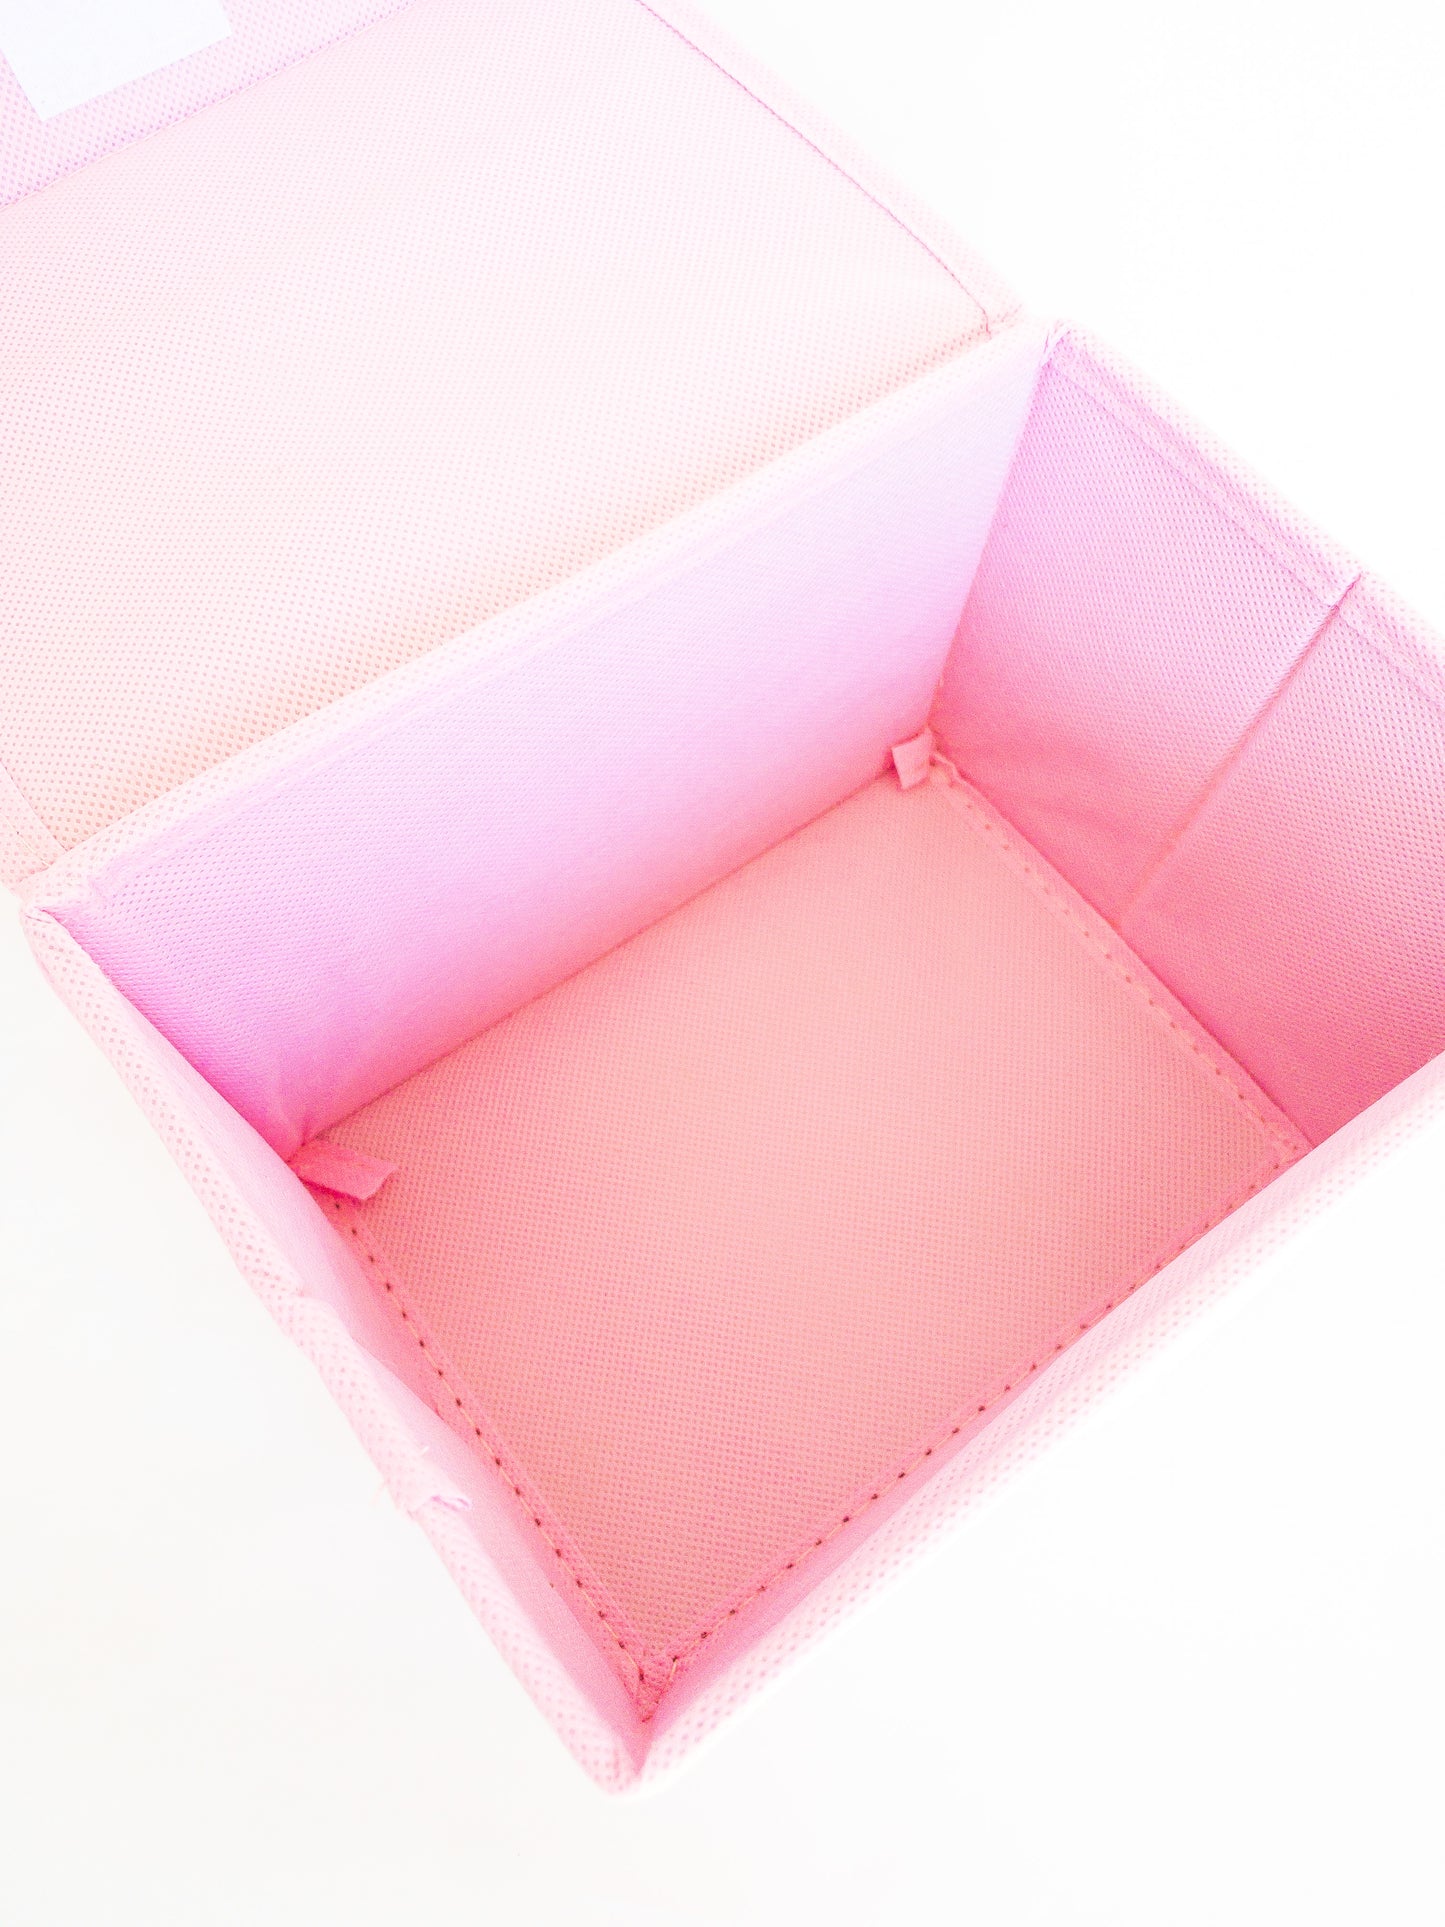 A multi-use, versatile storage box and the perfect place to throw all your Eggy Cakes hair clips in. The lid folds over and has a velcro close and it's large enough to hold pencils, markers, stickers, makeup, you name it